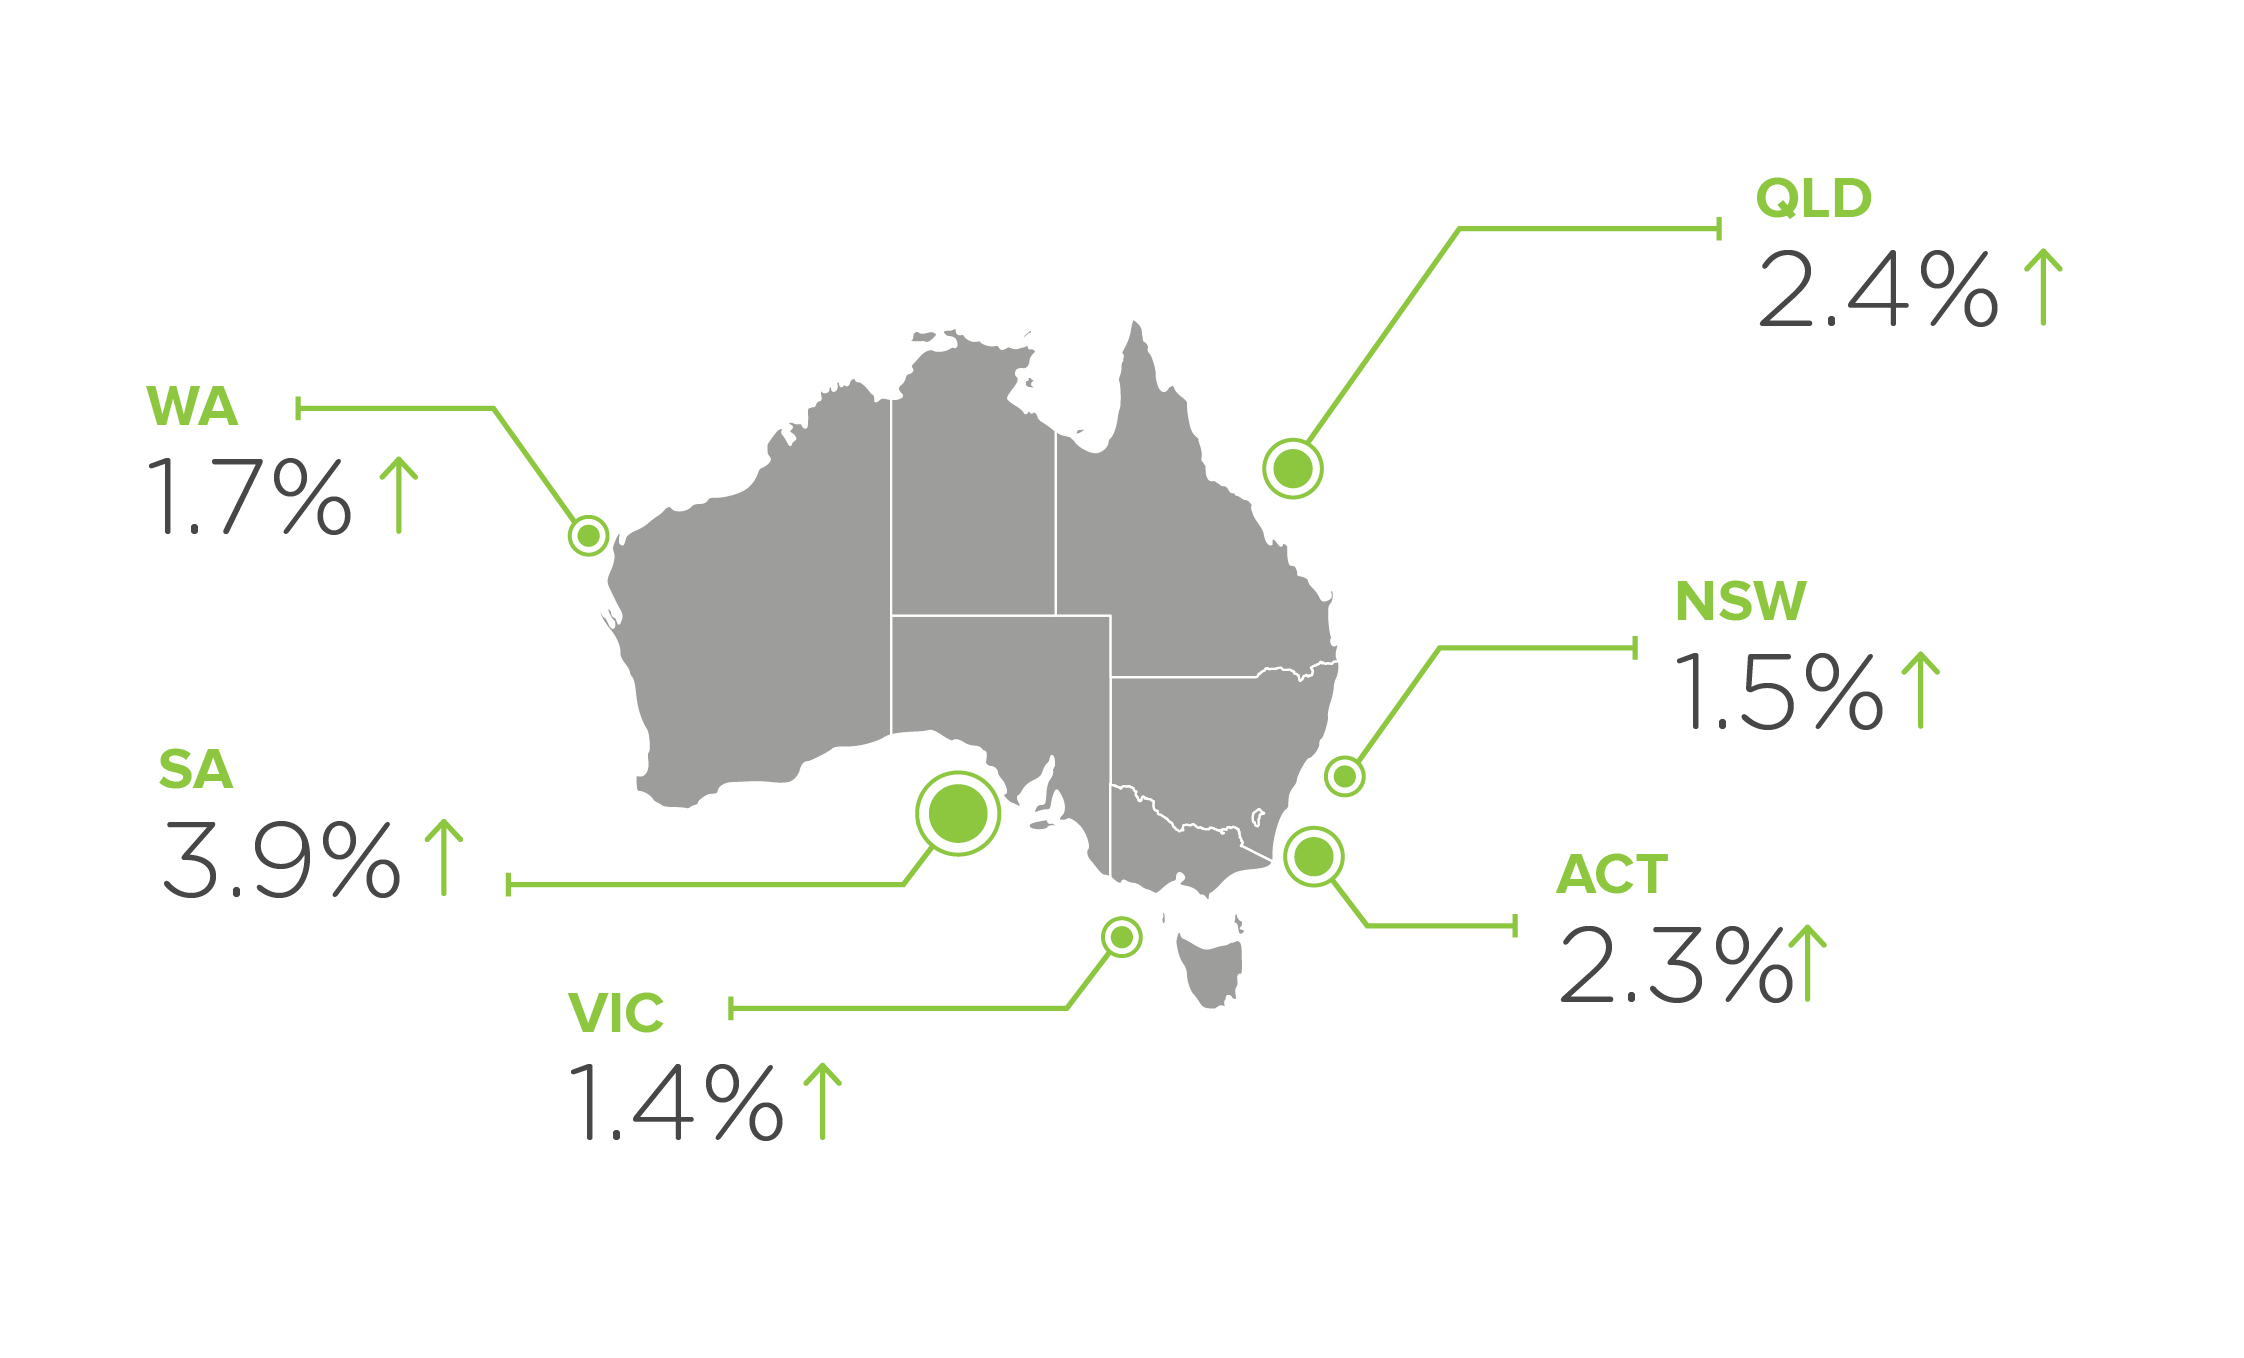 Map showing salary increases Australia wide, by state